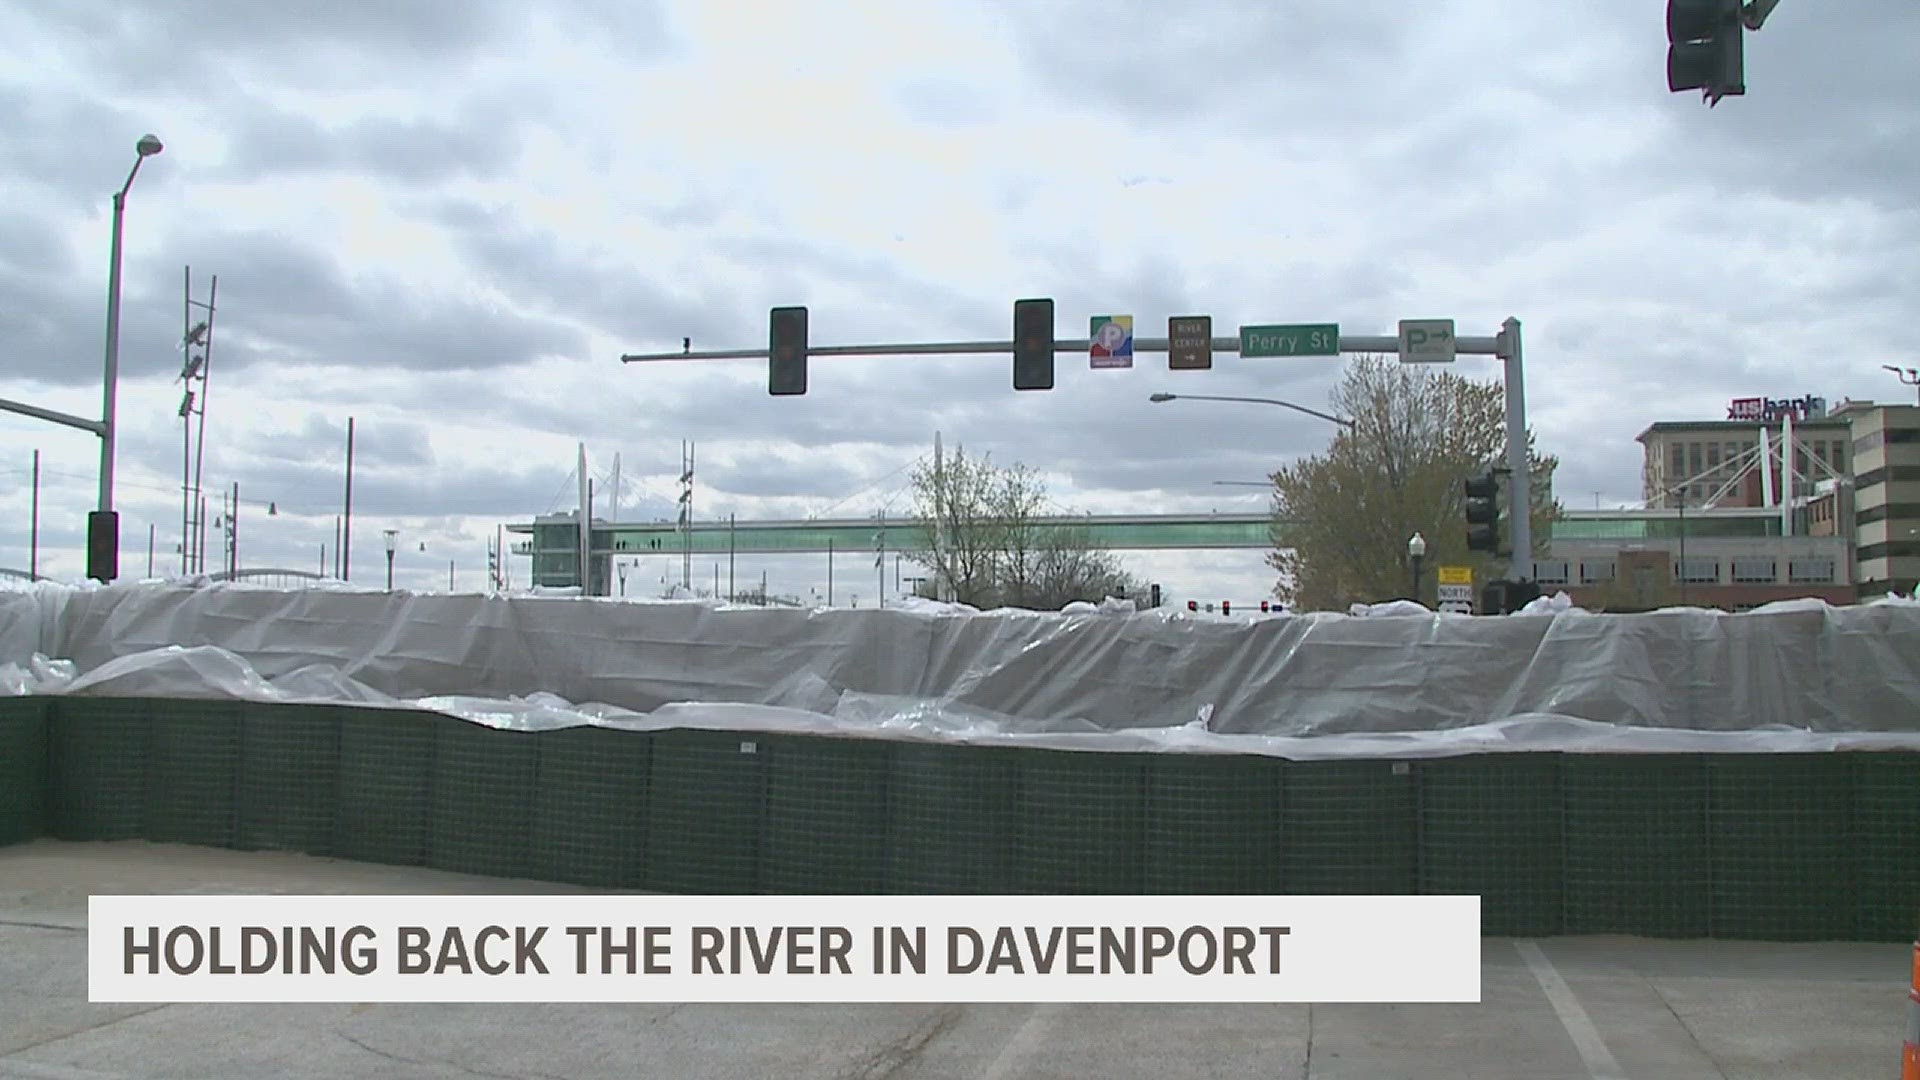 Davenport prepares once more to hold back flooding from the river ...